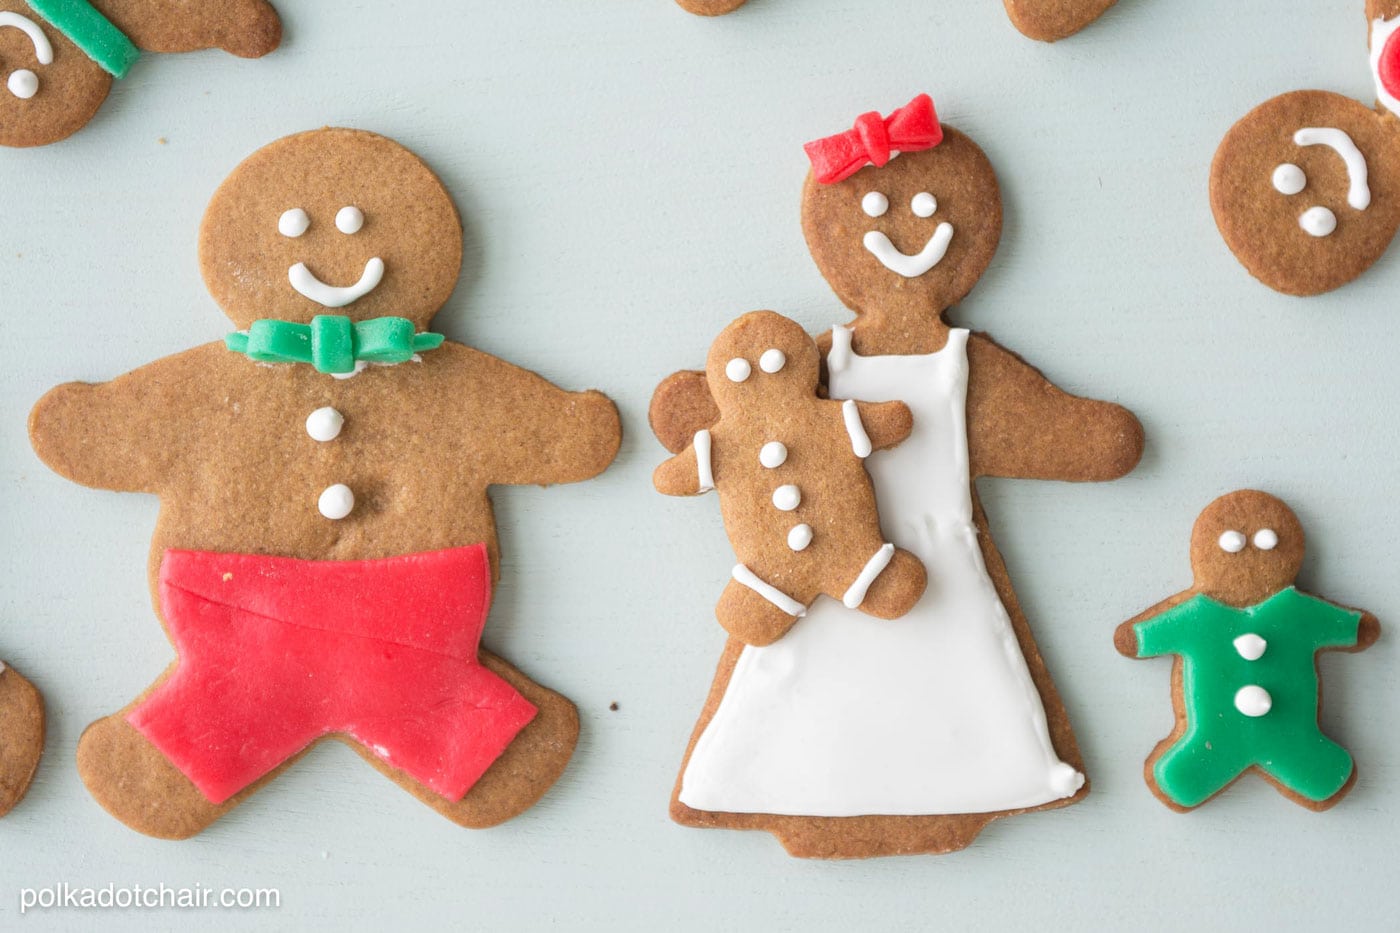 Gingerbread Christmas Cookie Decorating Ideas, use Airheads candy to cut out "clothes" and accessories for your gingerbread men